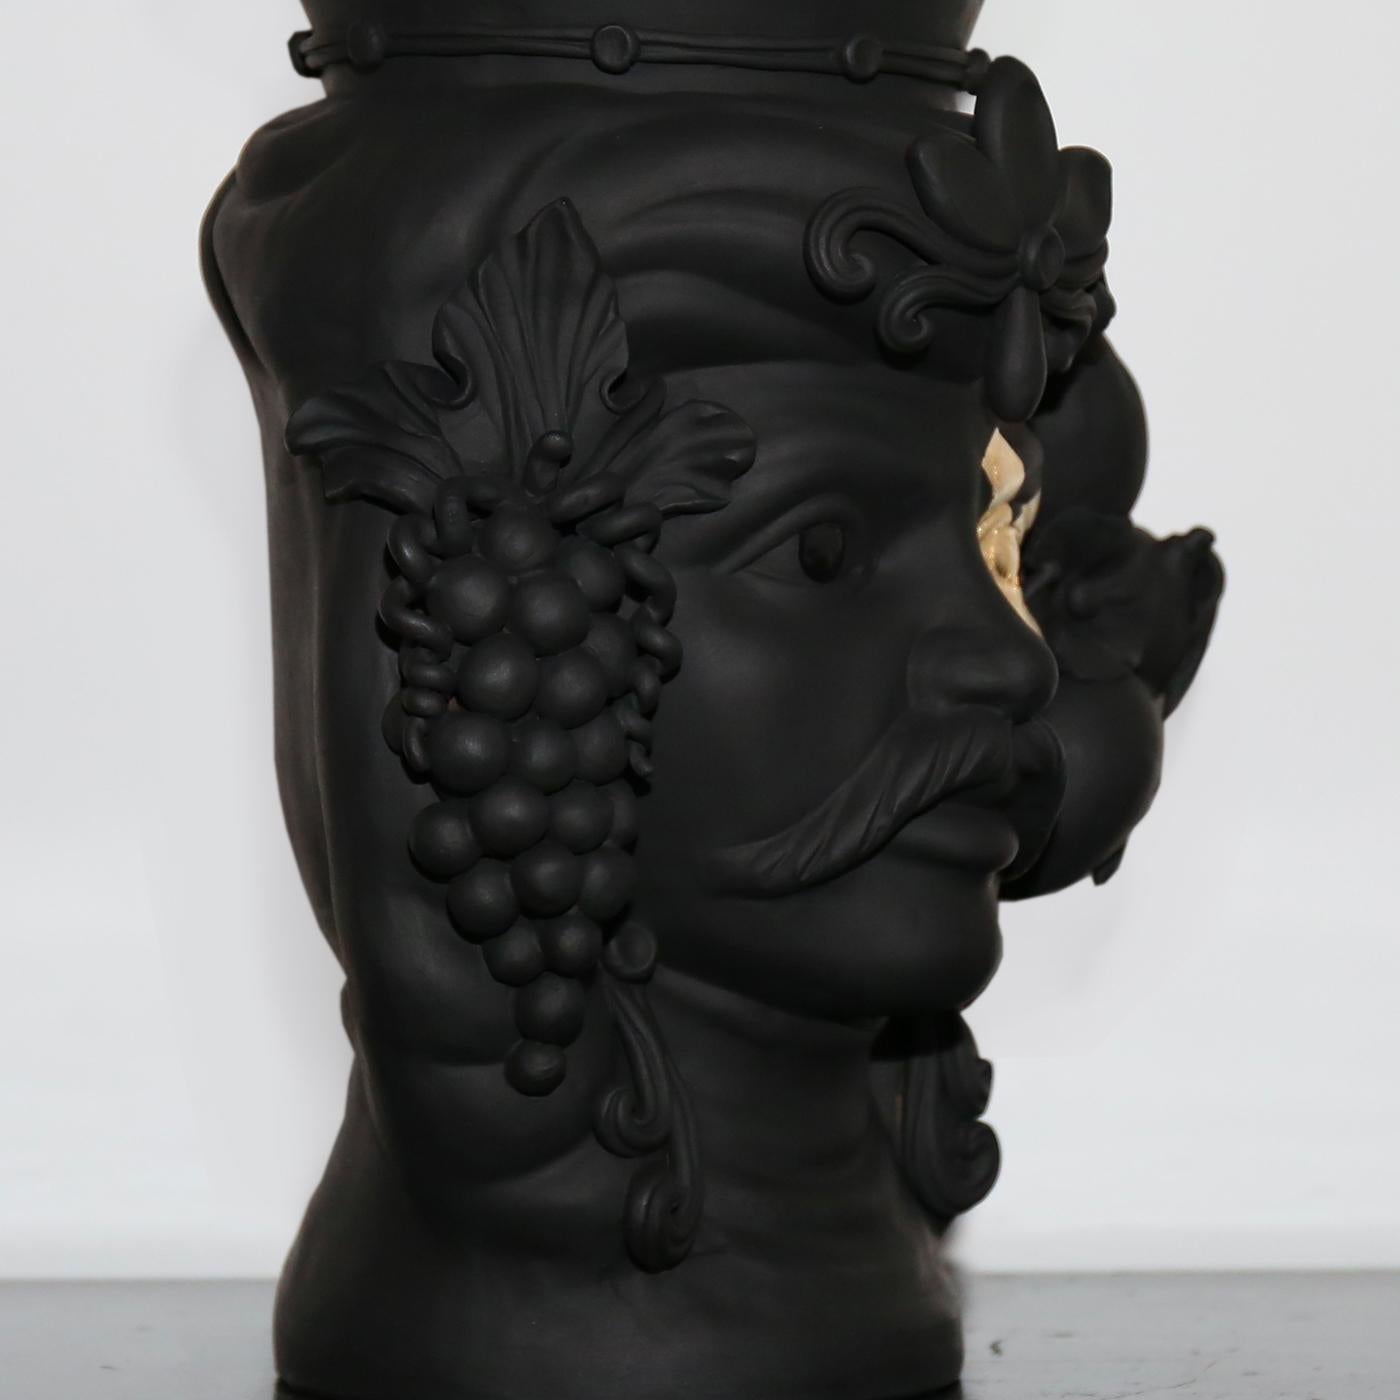 A striking piece of functional decor, this anthropomorphic vase of a Moor man is a testament to Sicily's rich crafting history and artistic patrimony. Entirely handcrafted and finished with a deep black glaze, this traditional statue is re-imagined